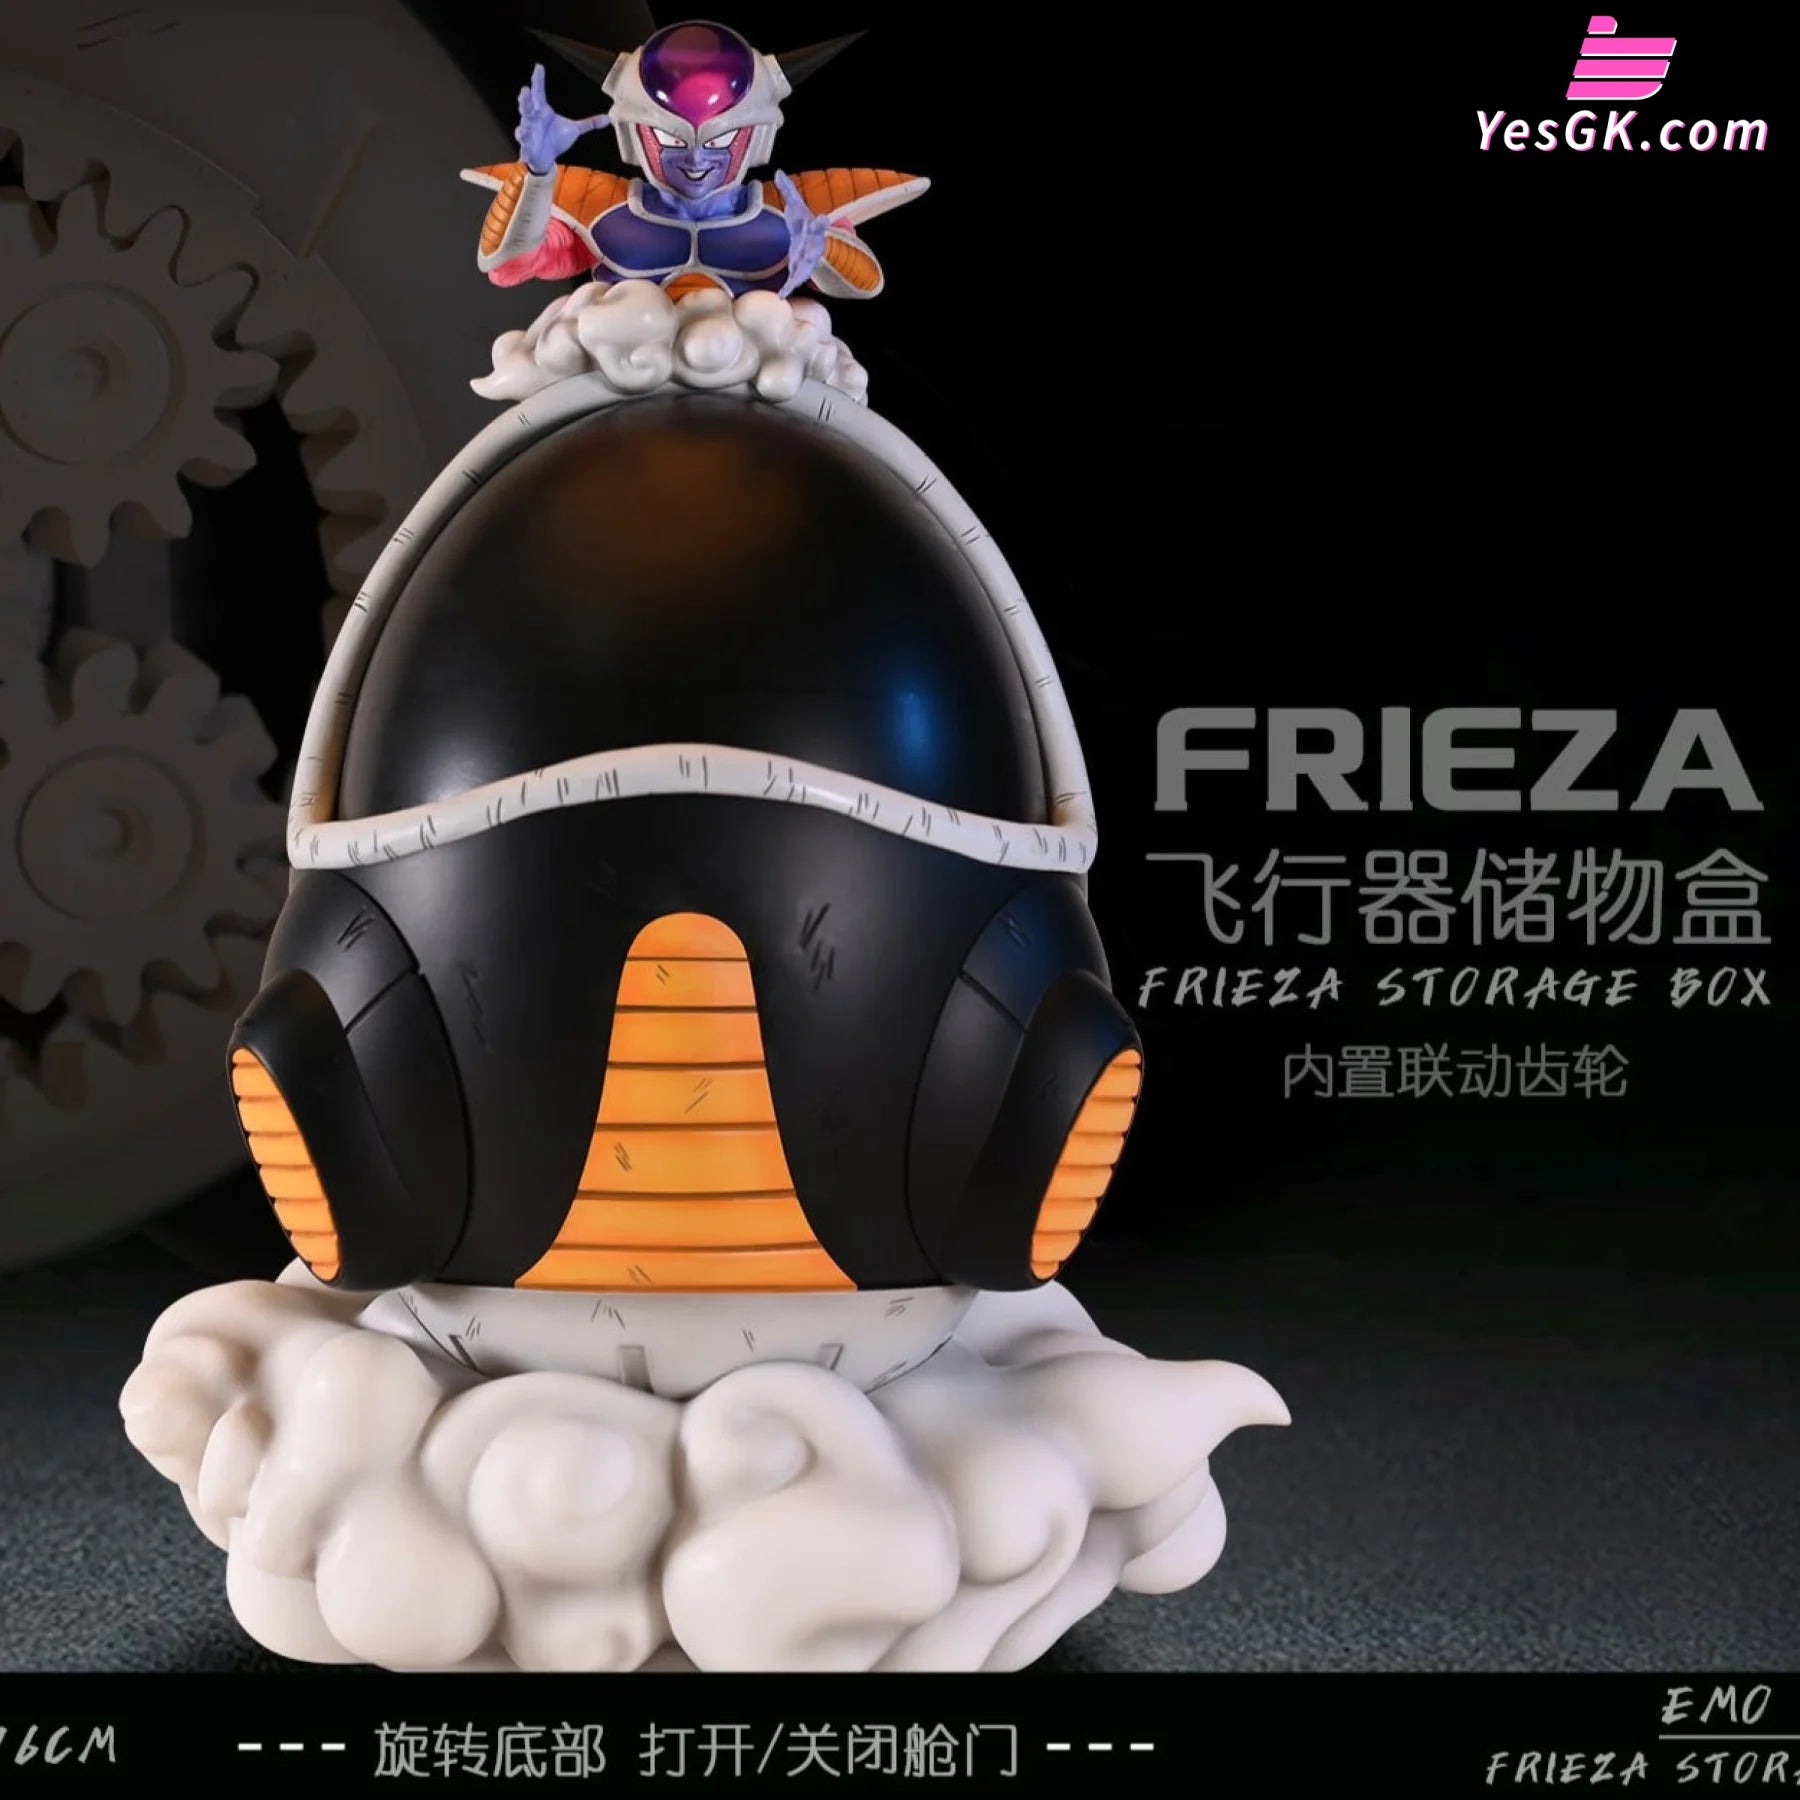 Dragon Ball Frieza Aircraft Storage Box Resin Statue - Emo Studio [In-Stock] Full Payment /